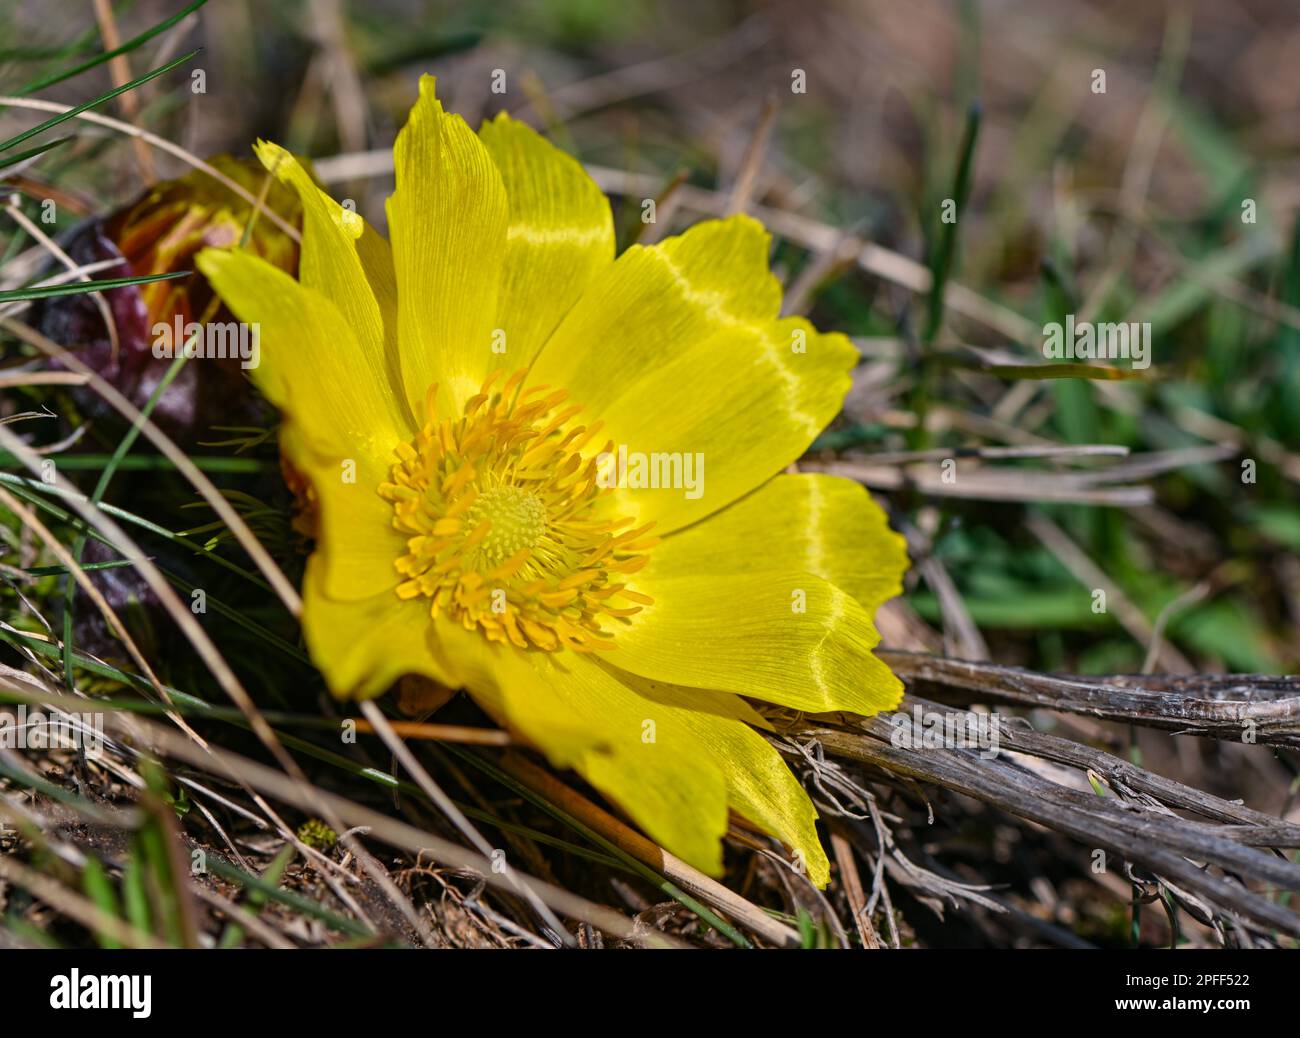 16 March 2023, Brandenburg, Lebus: An Adonis rose blooms on the Oder slope in the district of Märkisch-Oderland. The mild temperatures and warm sunshine of the last few days have led to the first Adonis florets blooming. The area between Lebus on the Oder and Mallnow on the Oderbruch rim in East Brandenburg is one of the largest contiguous Adonis rose areas in Europe. In Brandenburg, these strictly protected species only occur on the Pontic slopes north of Frankfurt (Oder). For the poisonous flowers, the area was declared a Trockerasen nature reserve in 1984. Photo: Patrick Pleul/dpa Stock Photo